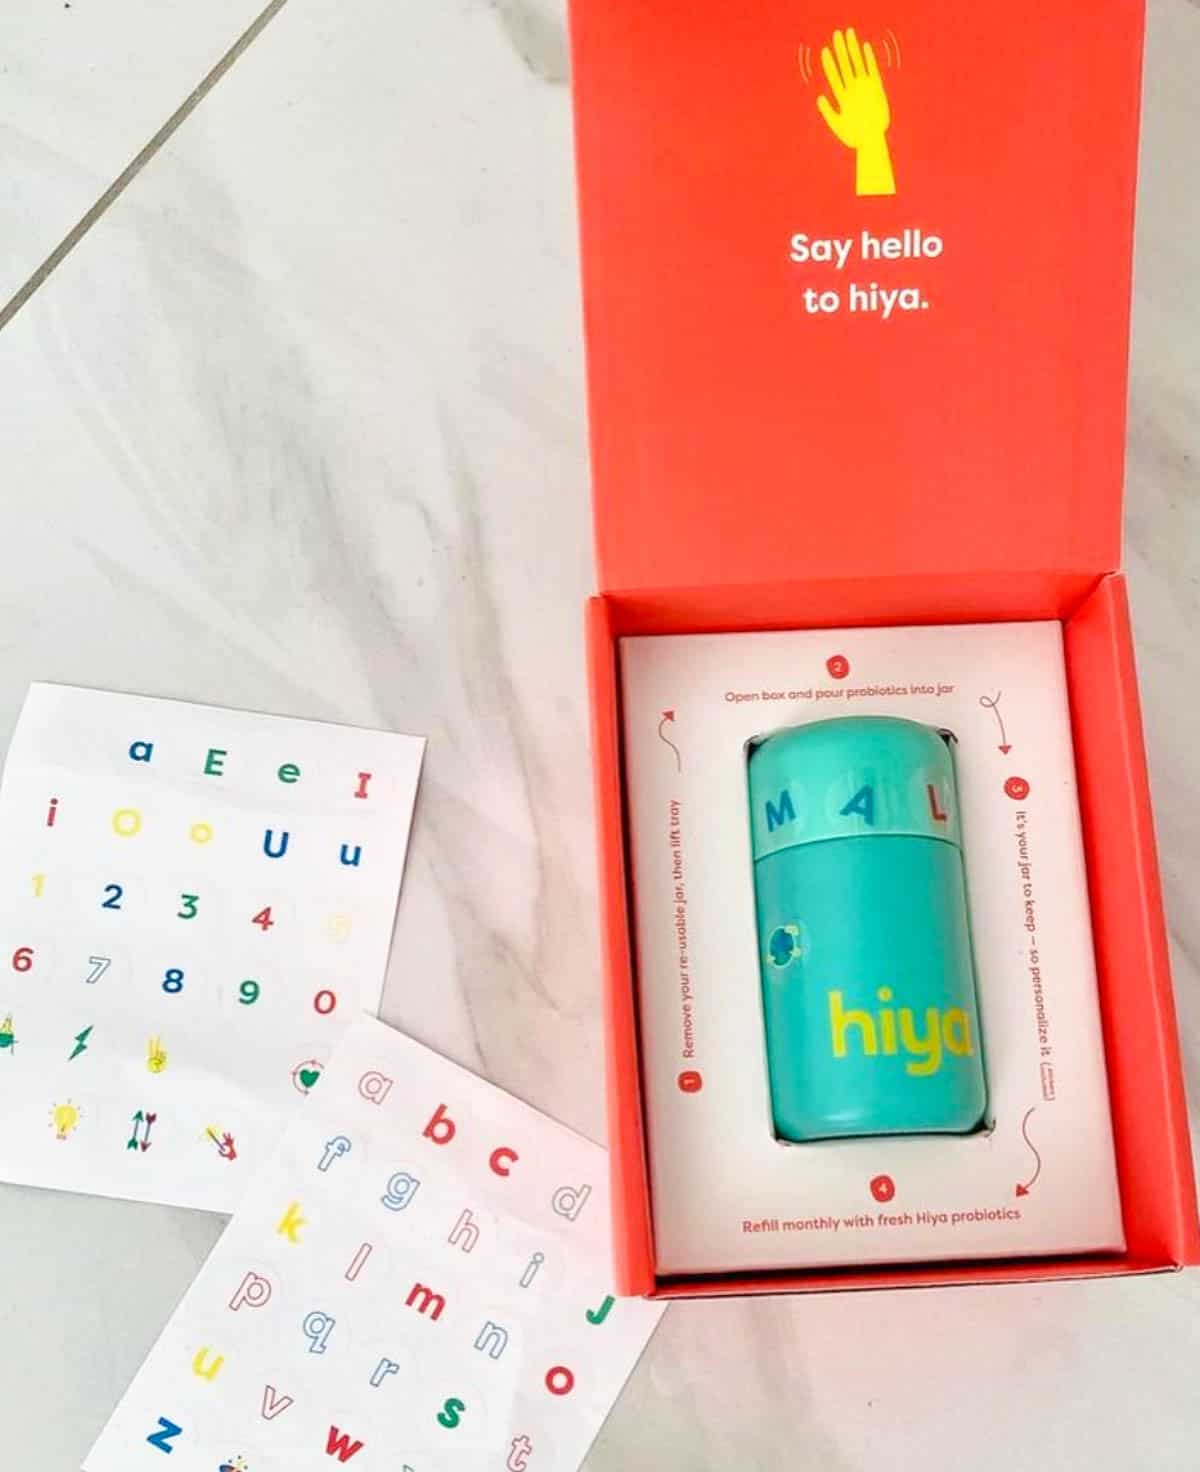 Bottle of Hiya probiotics decorated in a box.